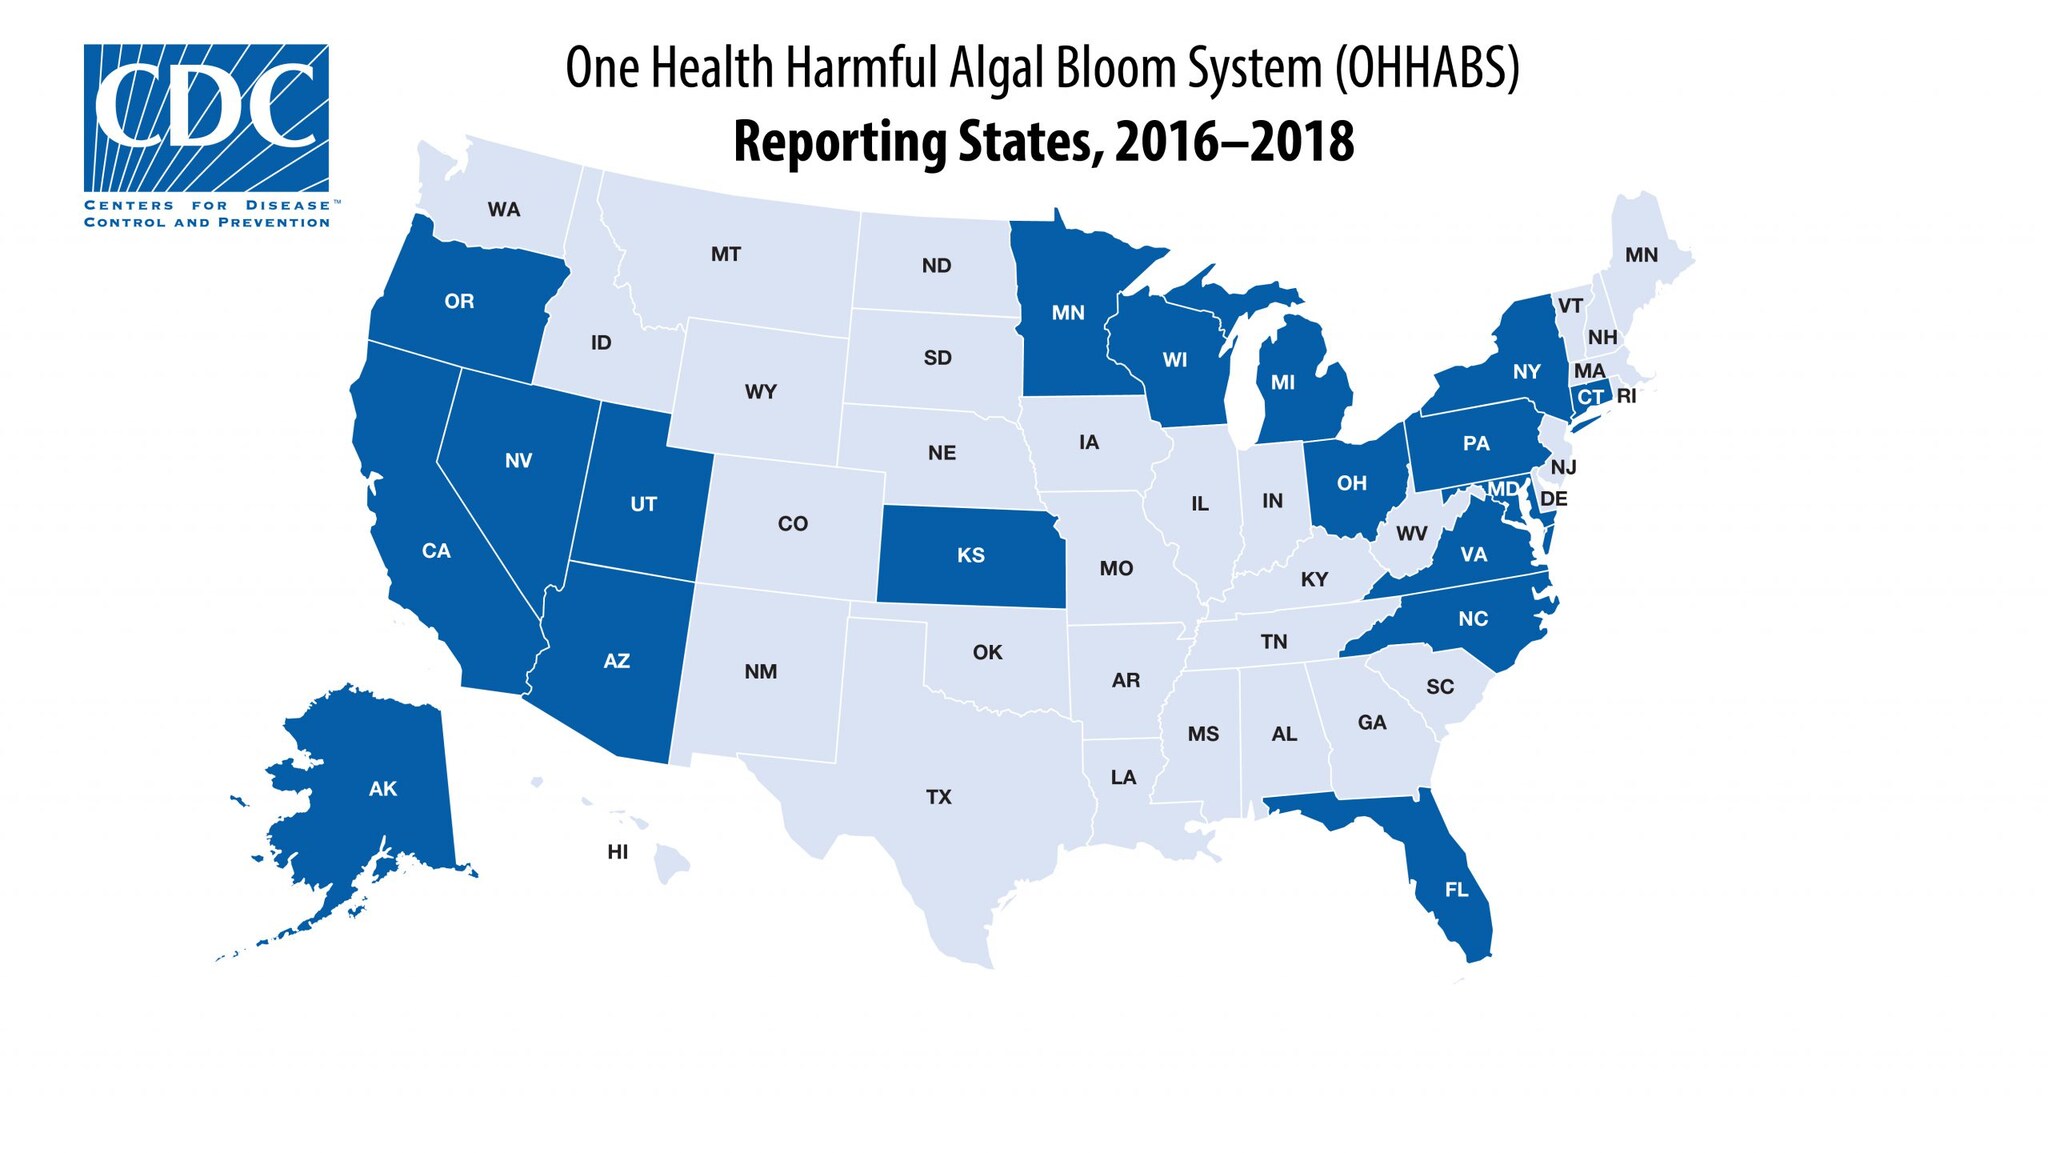 Map of the United States showing the 18 states that reported to OHHABS during 2016 to 2018.